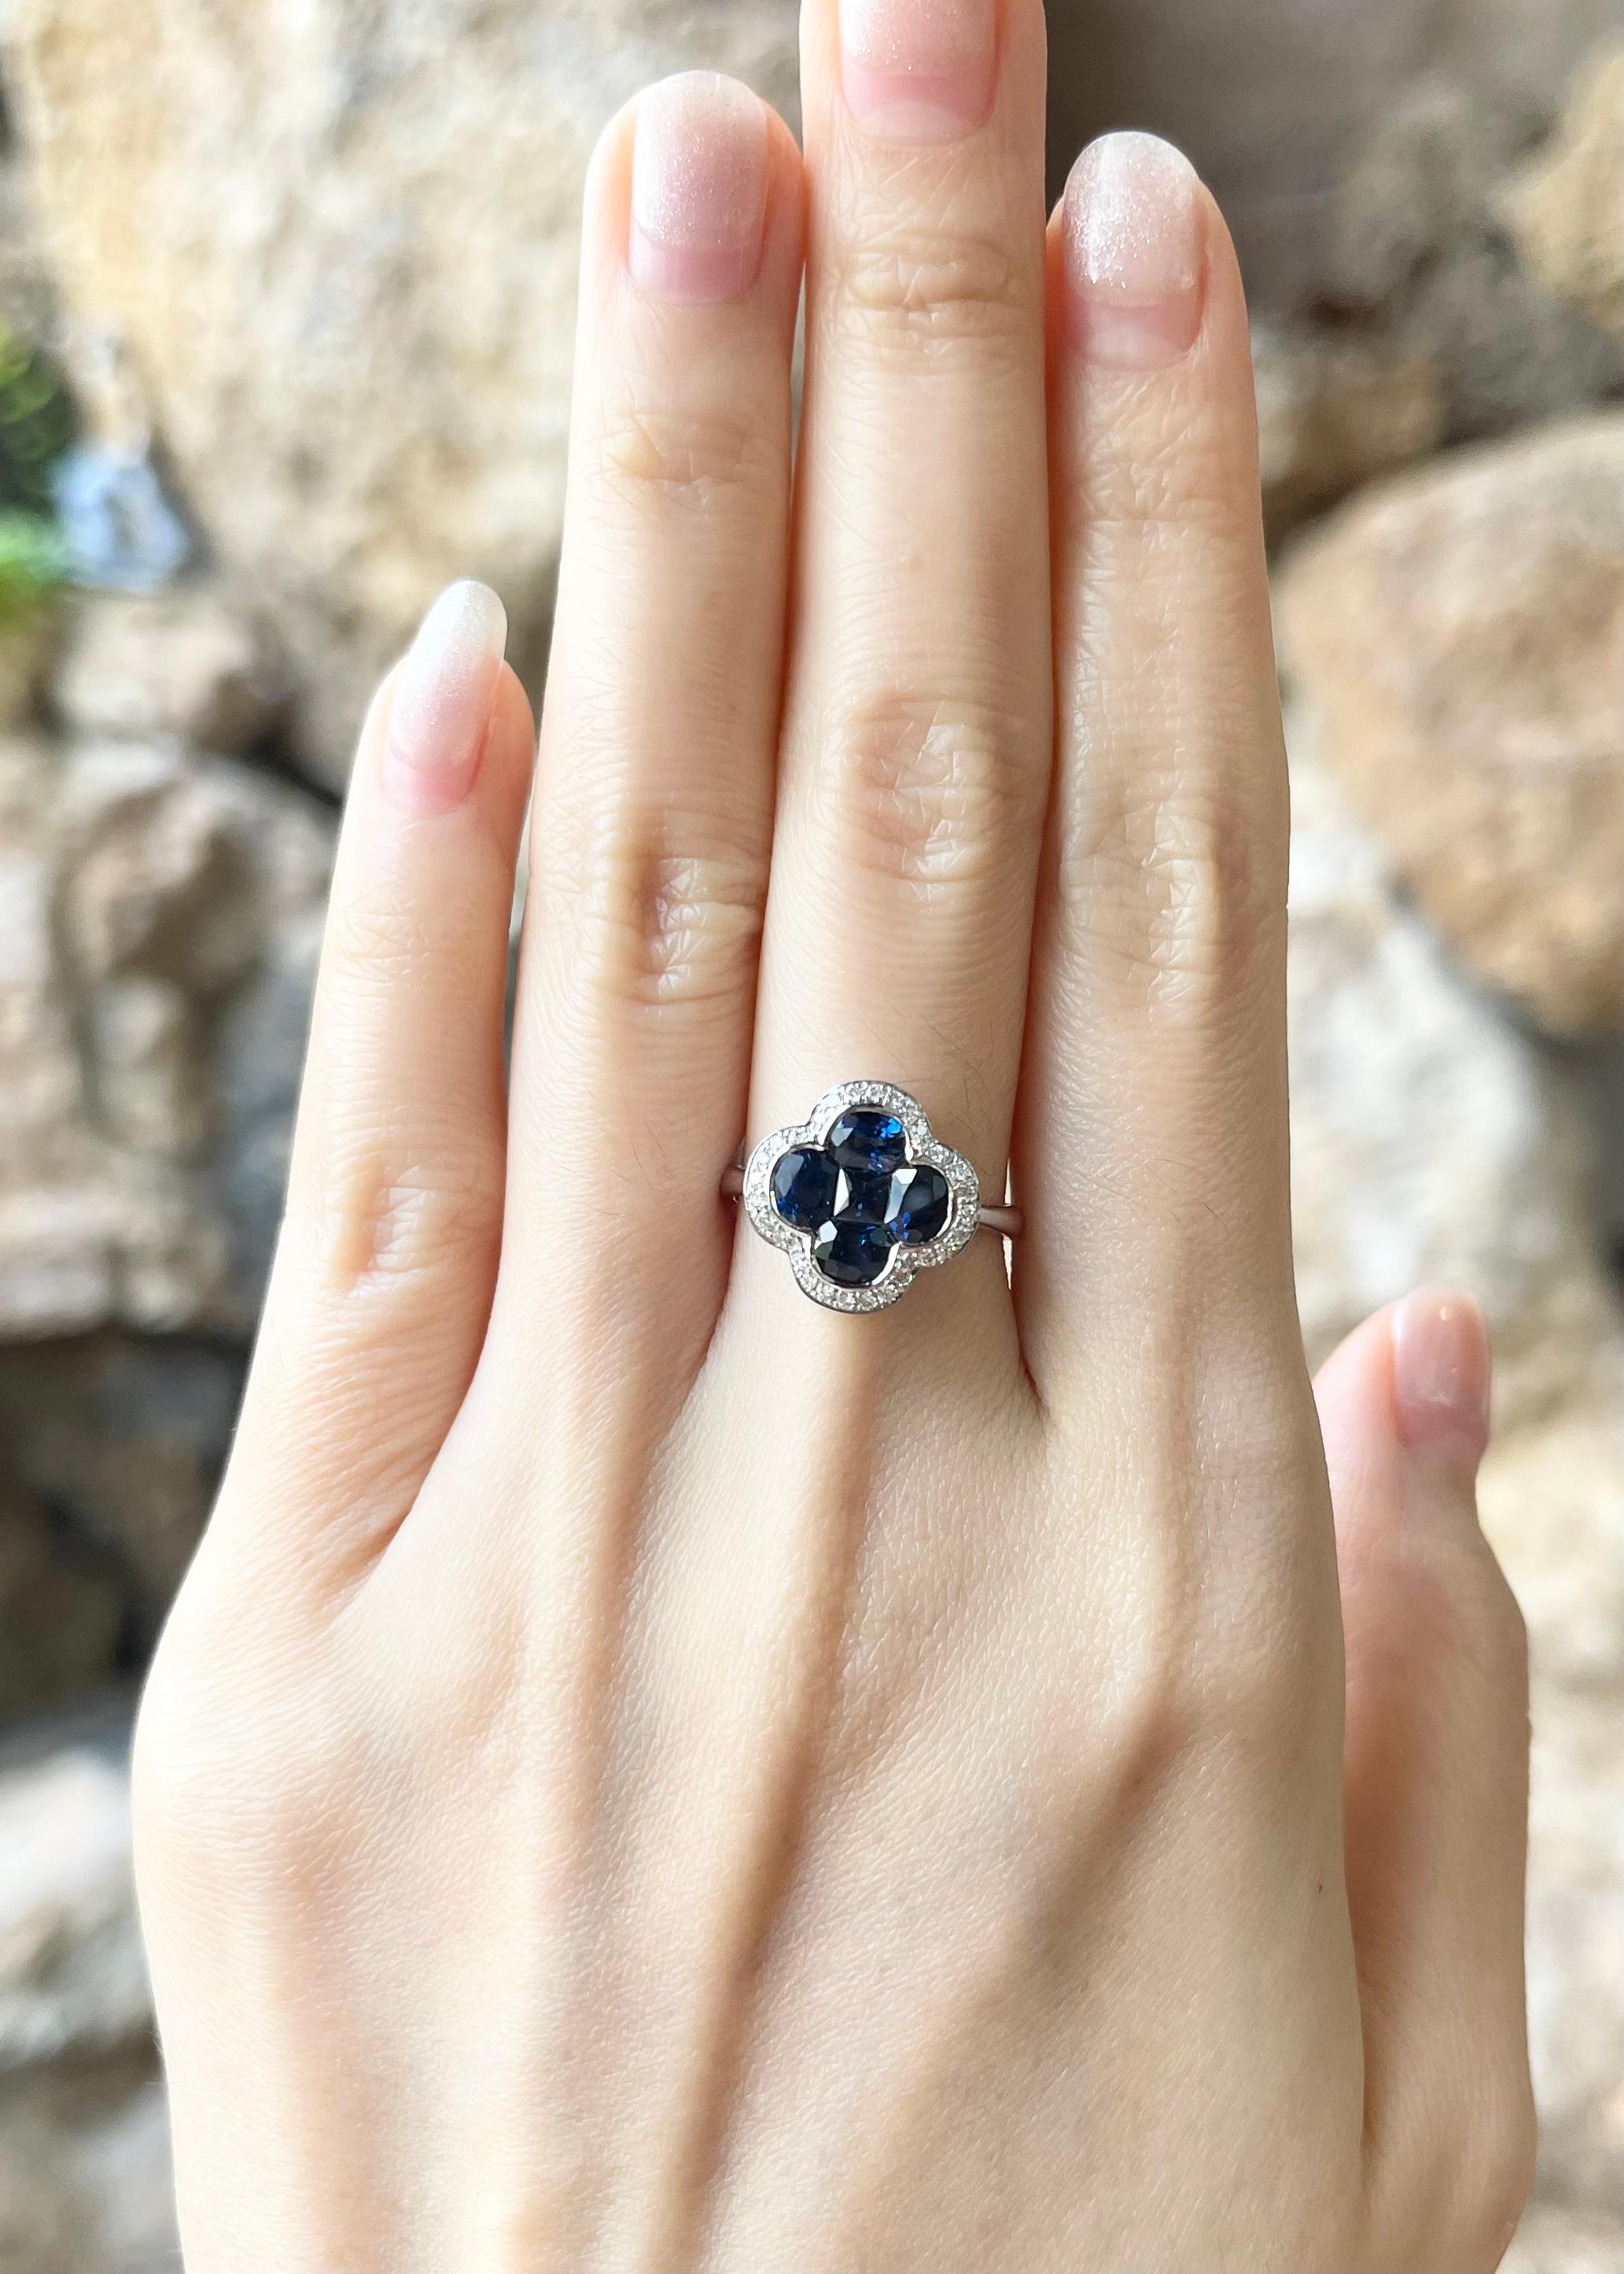 Blue Sapphire 1.83 carats with Diamond 0.15 carat Ring set in 18K White Gold Settings

Width:  1.4 cm 
Length: 1.4 cm
Ring Size: 52
Total Weight: 4.94 grams

